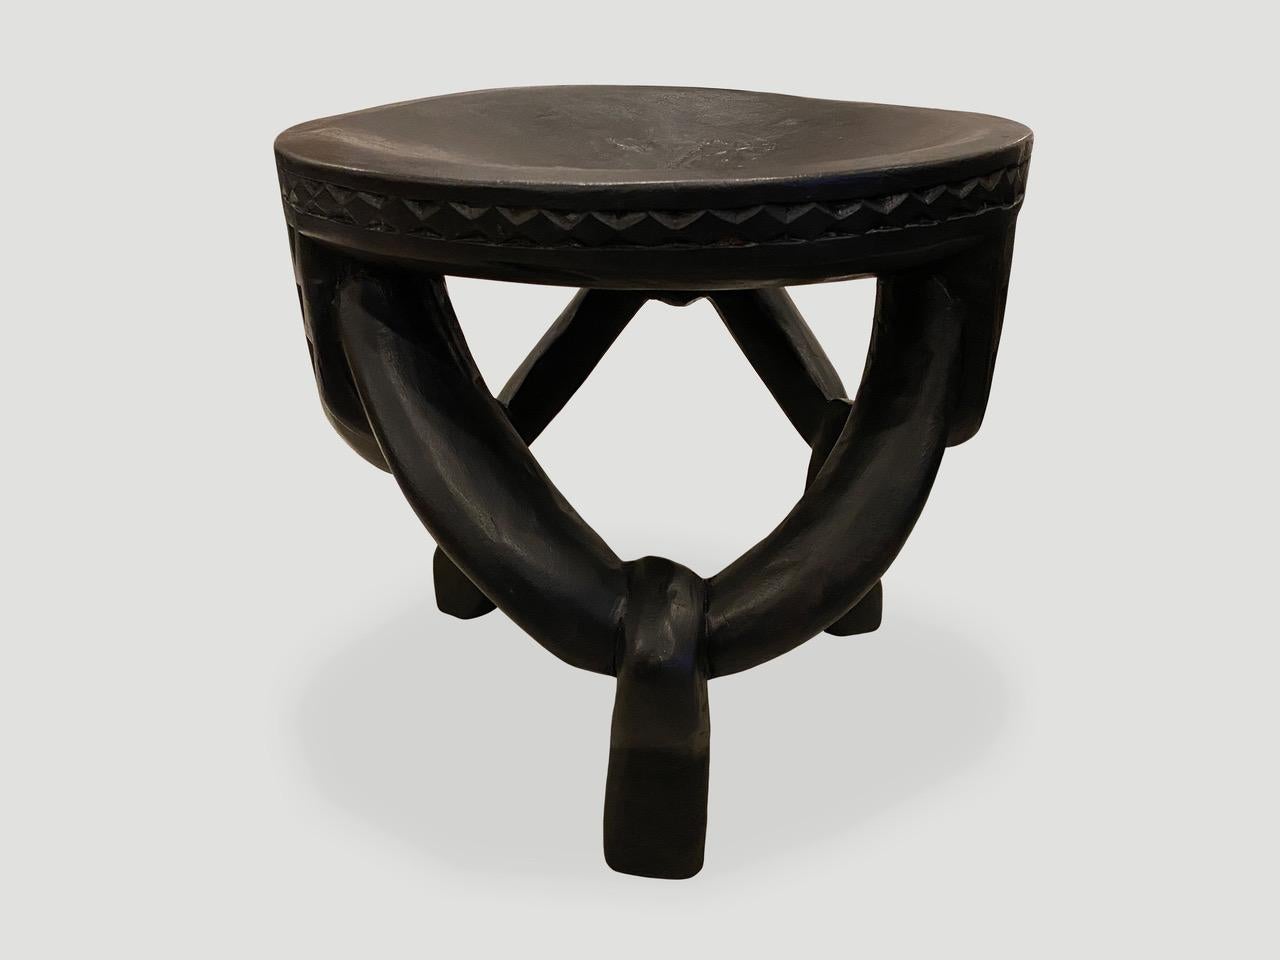 Impressive antique African mahogany side table or stool, hand carved from a single block of mahogany wood. Great for placing a book or perhaps towels in a bathroom, magazines etc. A beautiful, versatile item that is both sculptural and usable. This